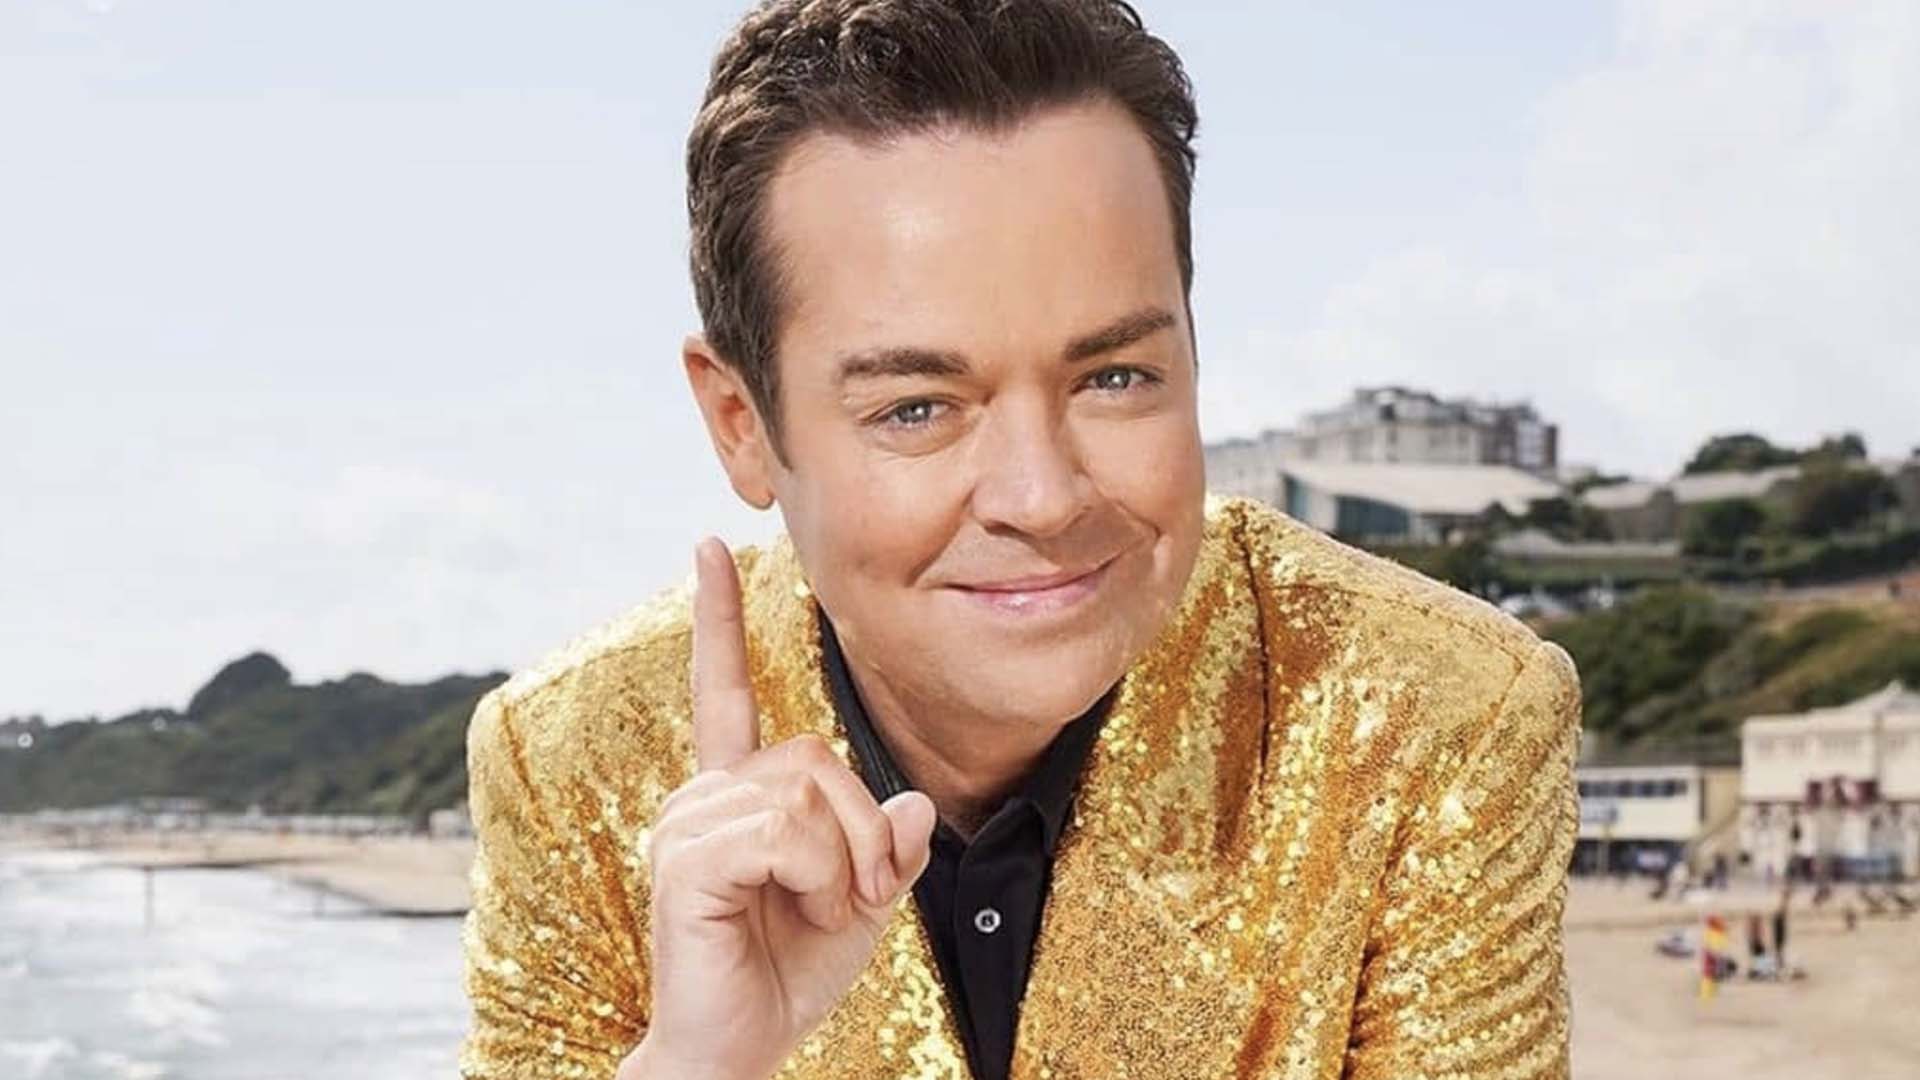 Stephen Mulhern in a gold jacket